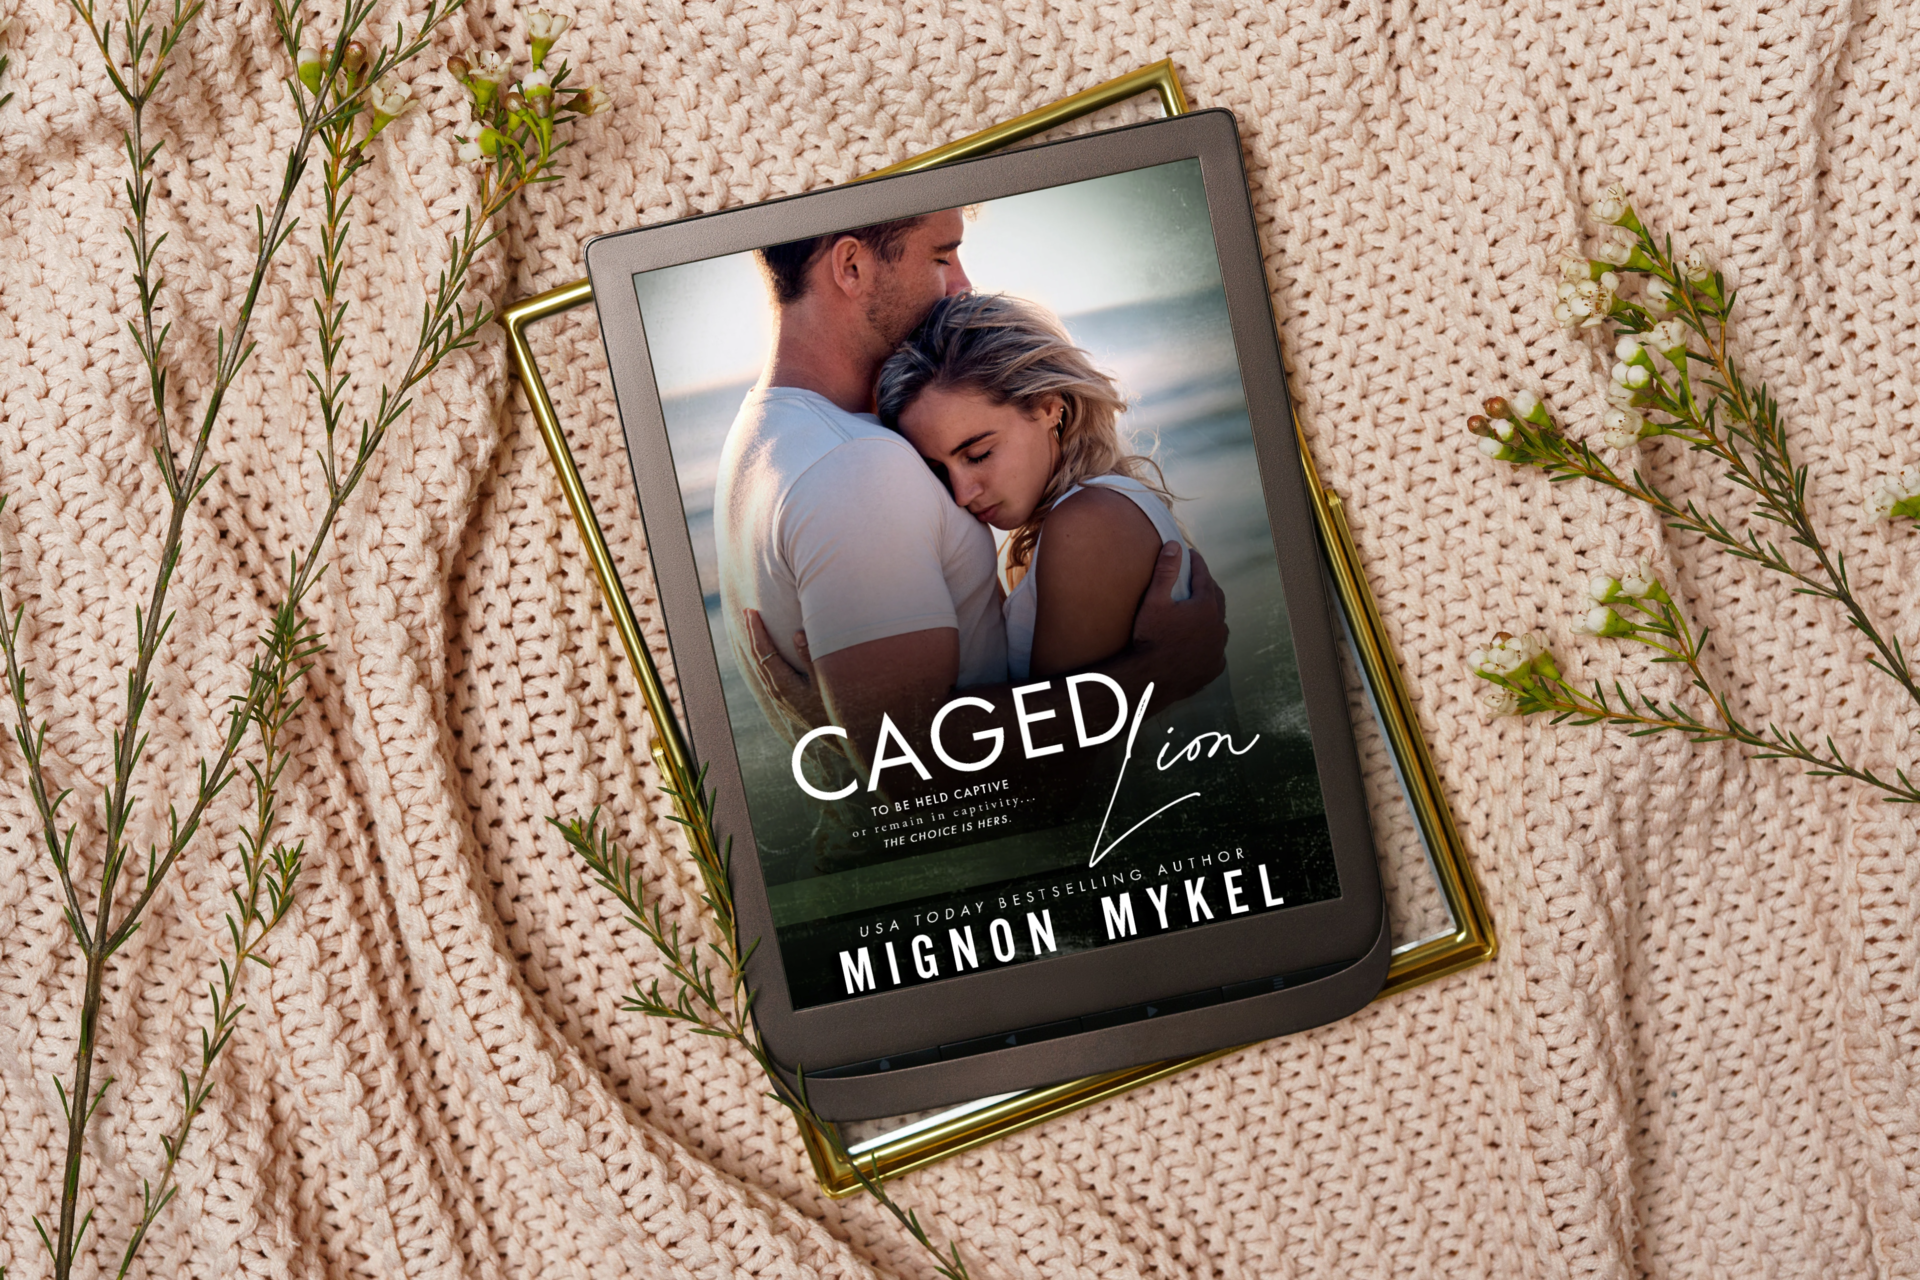 You are currently viewing Release Day: “Caged Lion” by Mignon Mykel